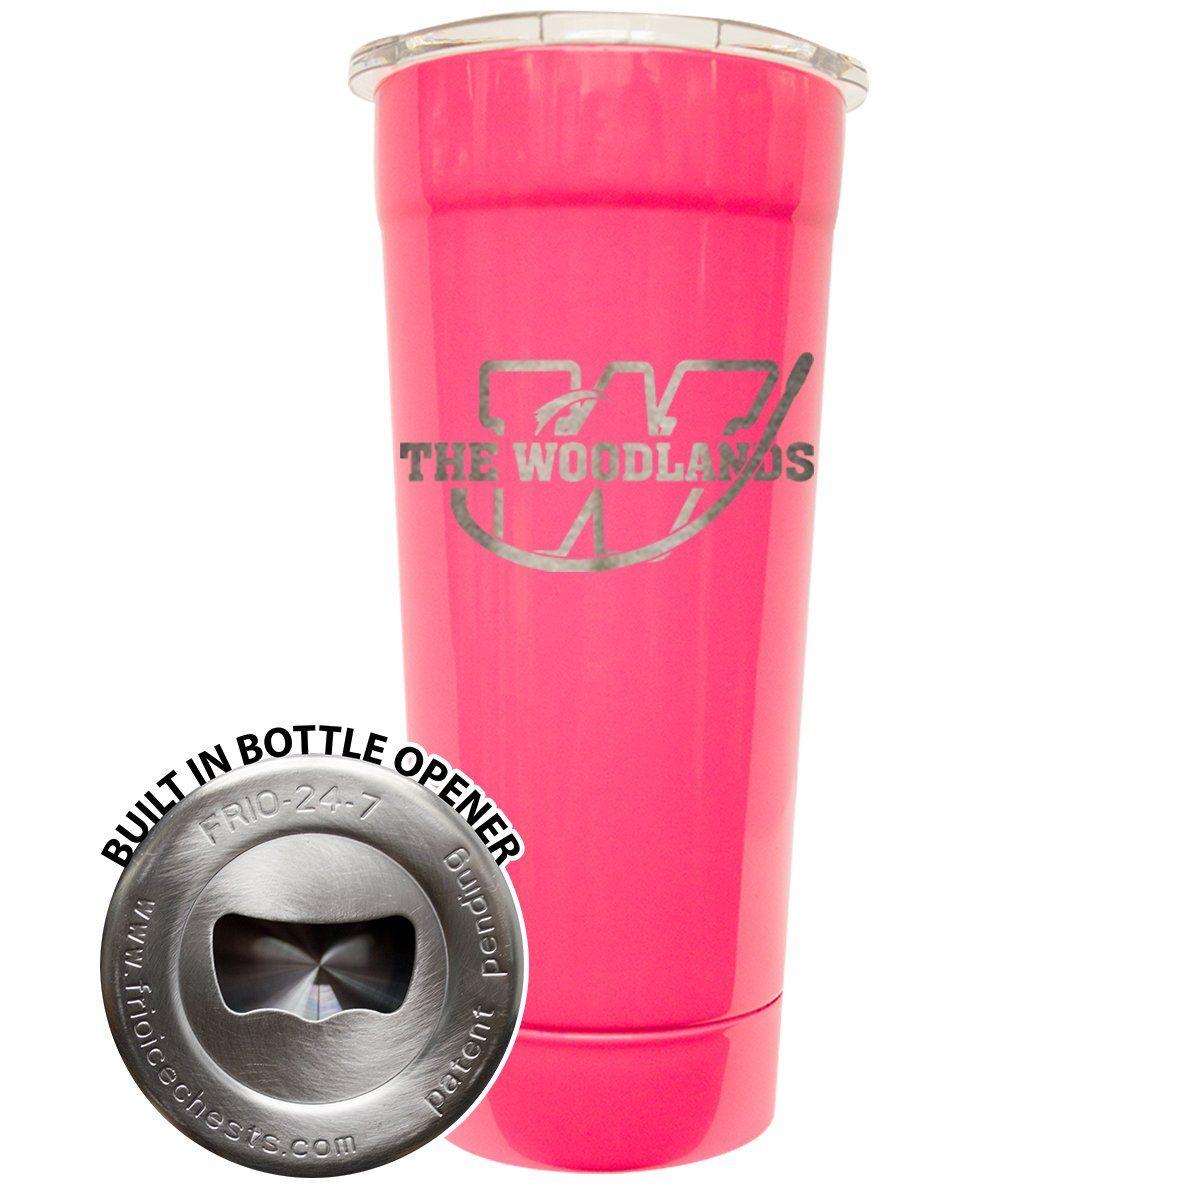 TWHS Logo - Frio 24-7 Neon Pink Powder Coated Cup w/ Bottle Opener and TWHS Logo